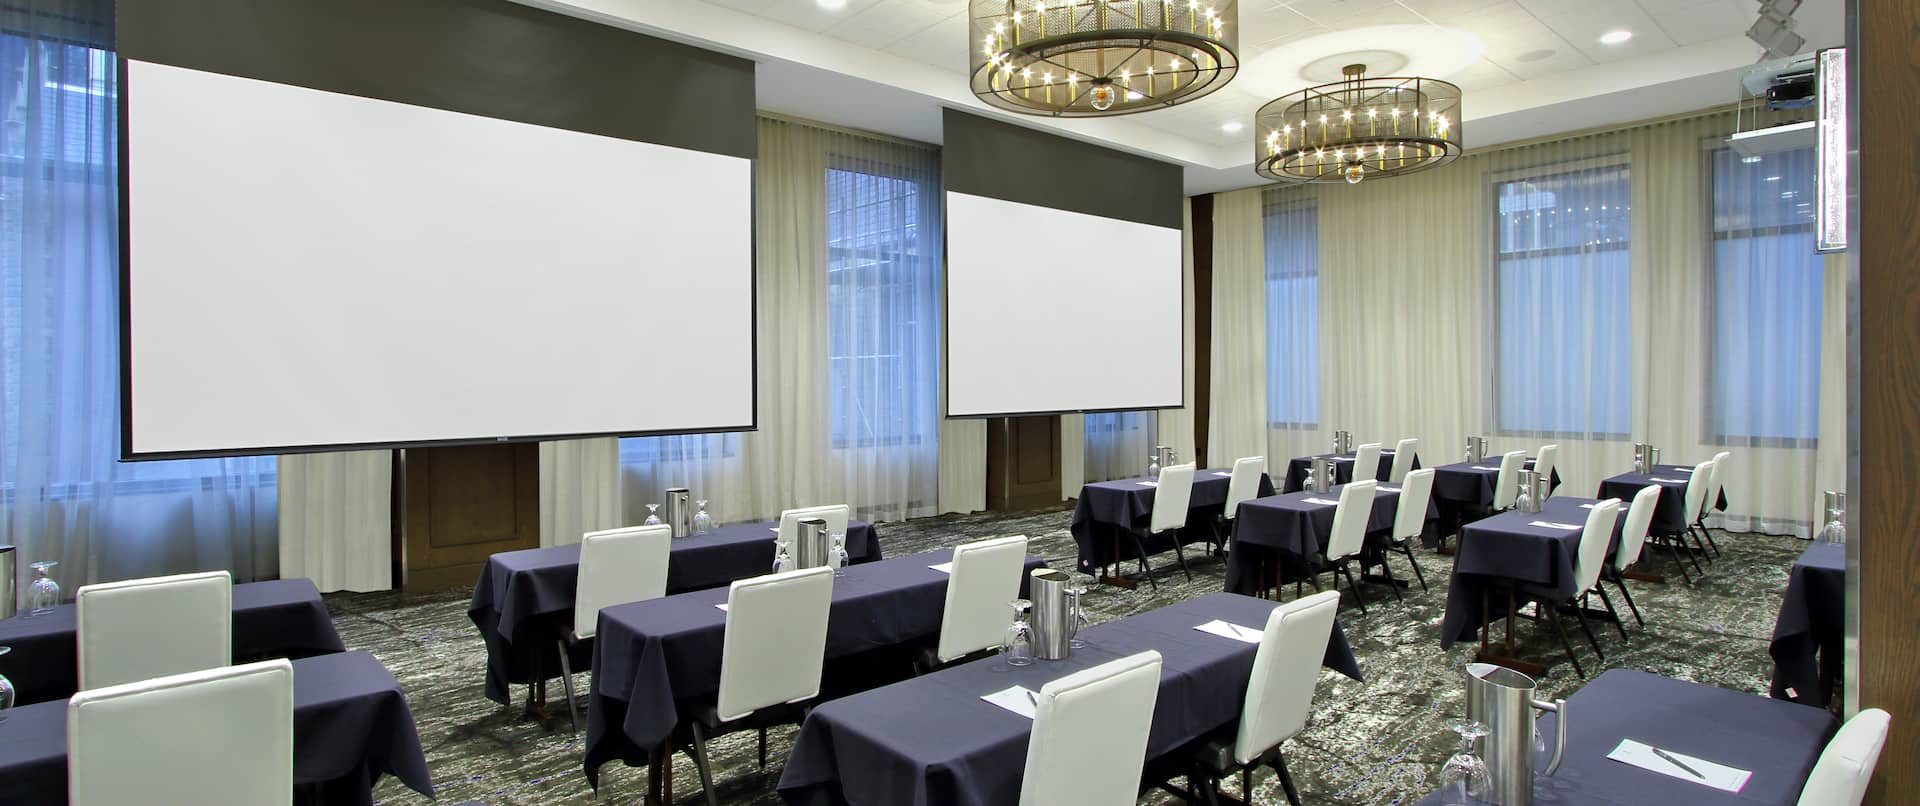 Large modren meeting room with neutral decor